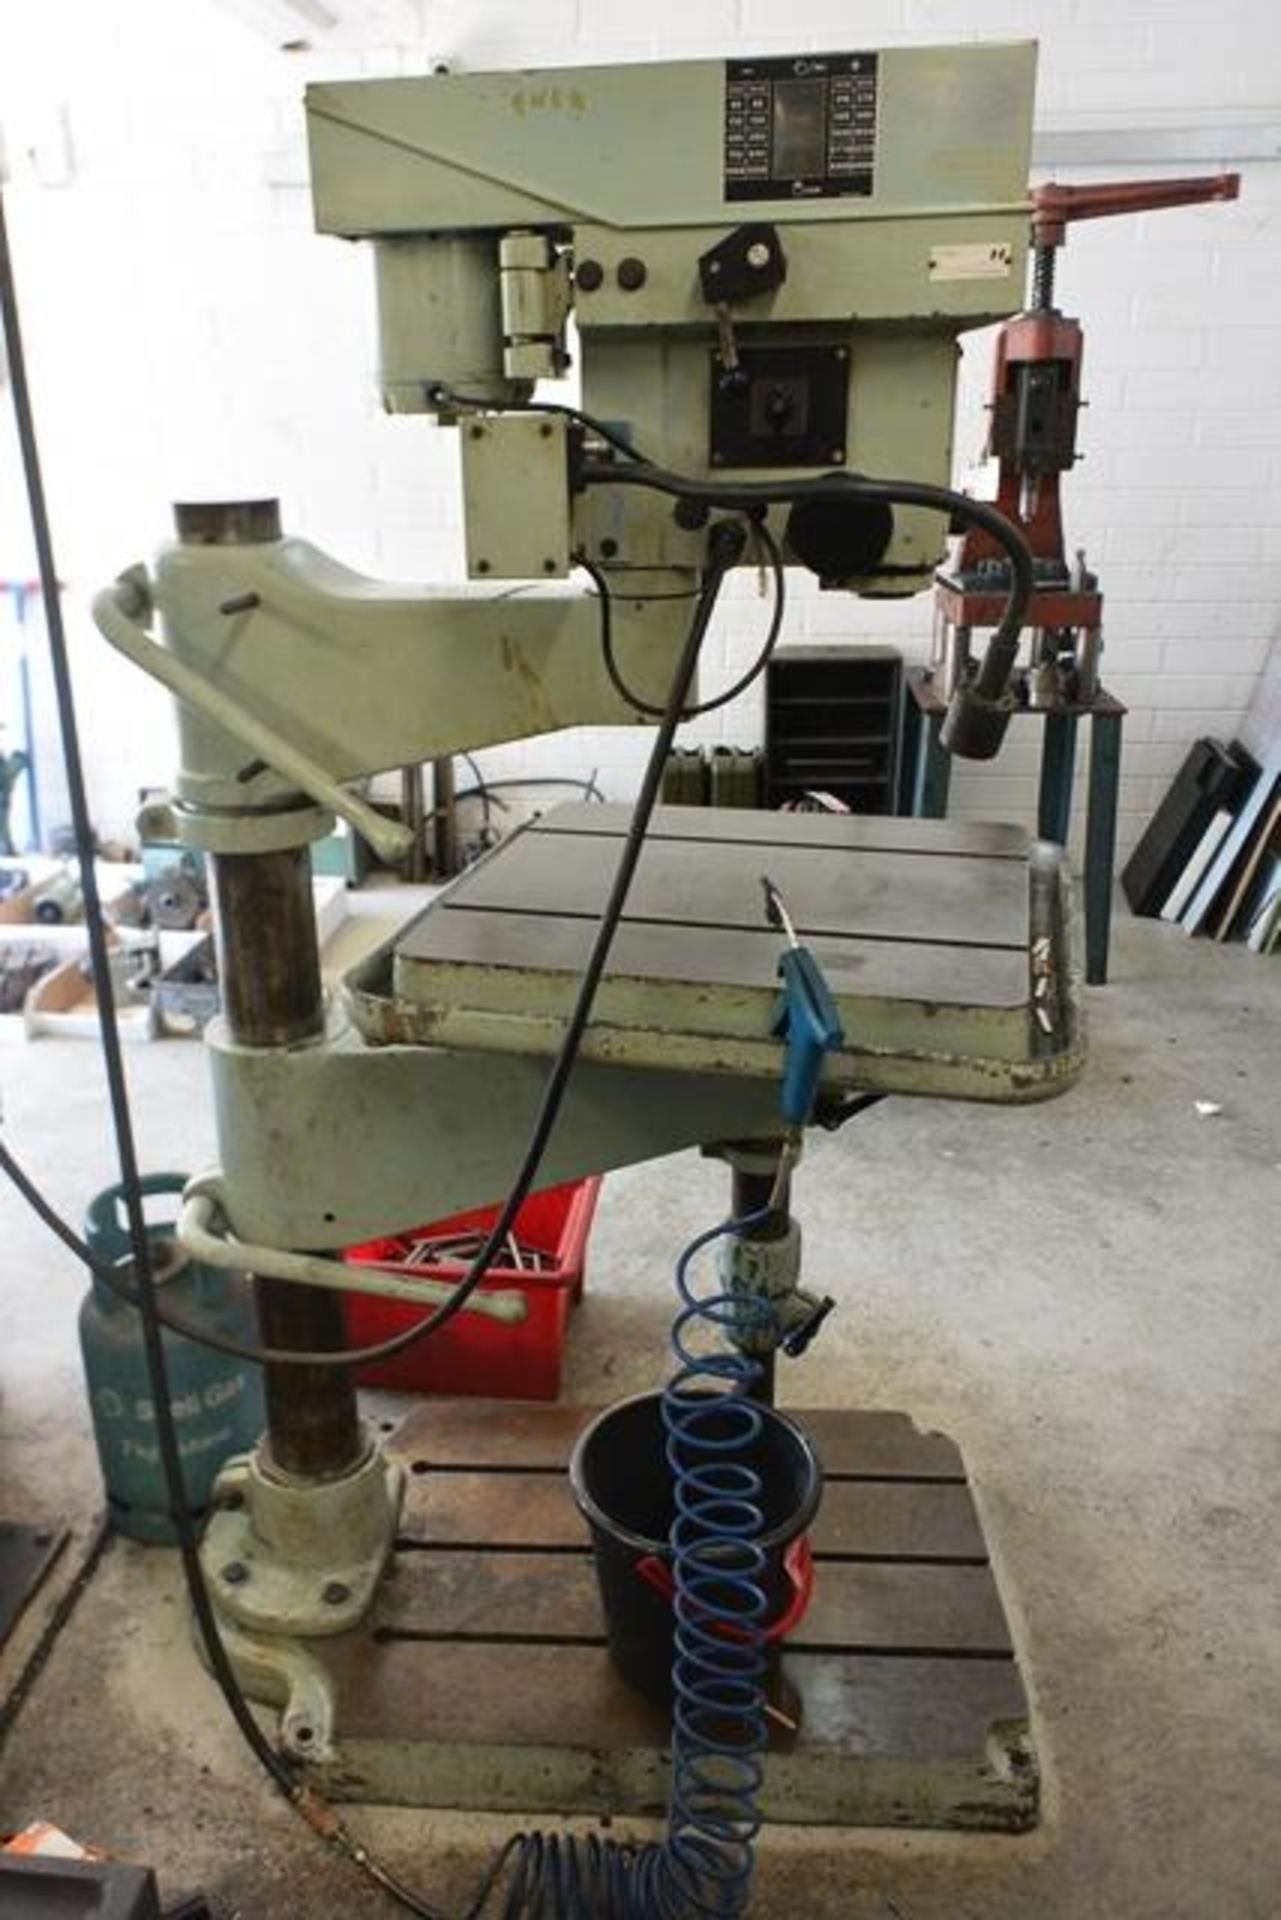 Meddings A10/3 articulated radial arm drill, serial no. 03811 table size: 24 x 24" max spindle - Image 4 of 5